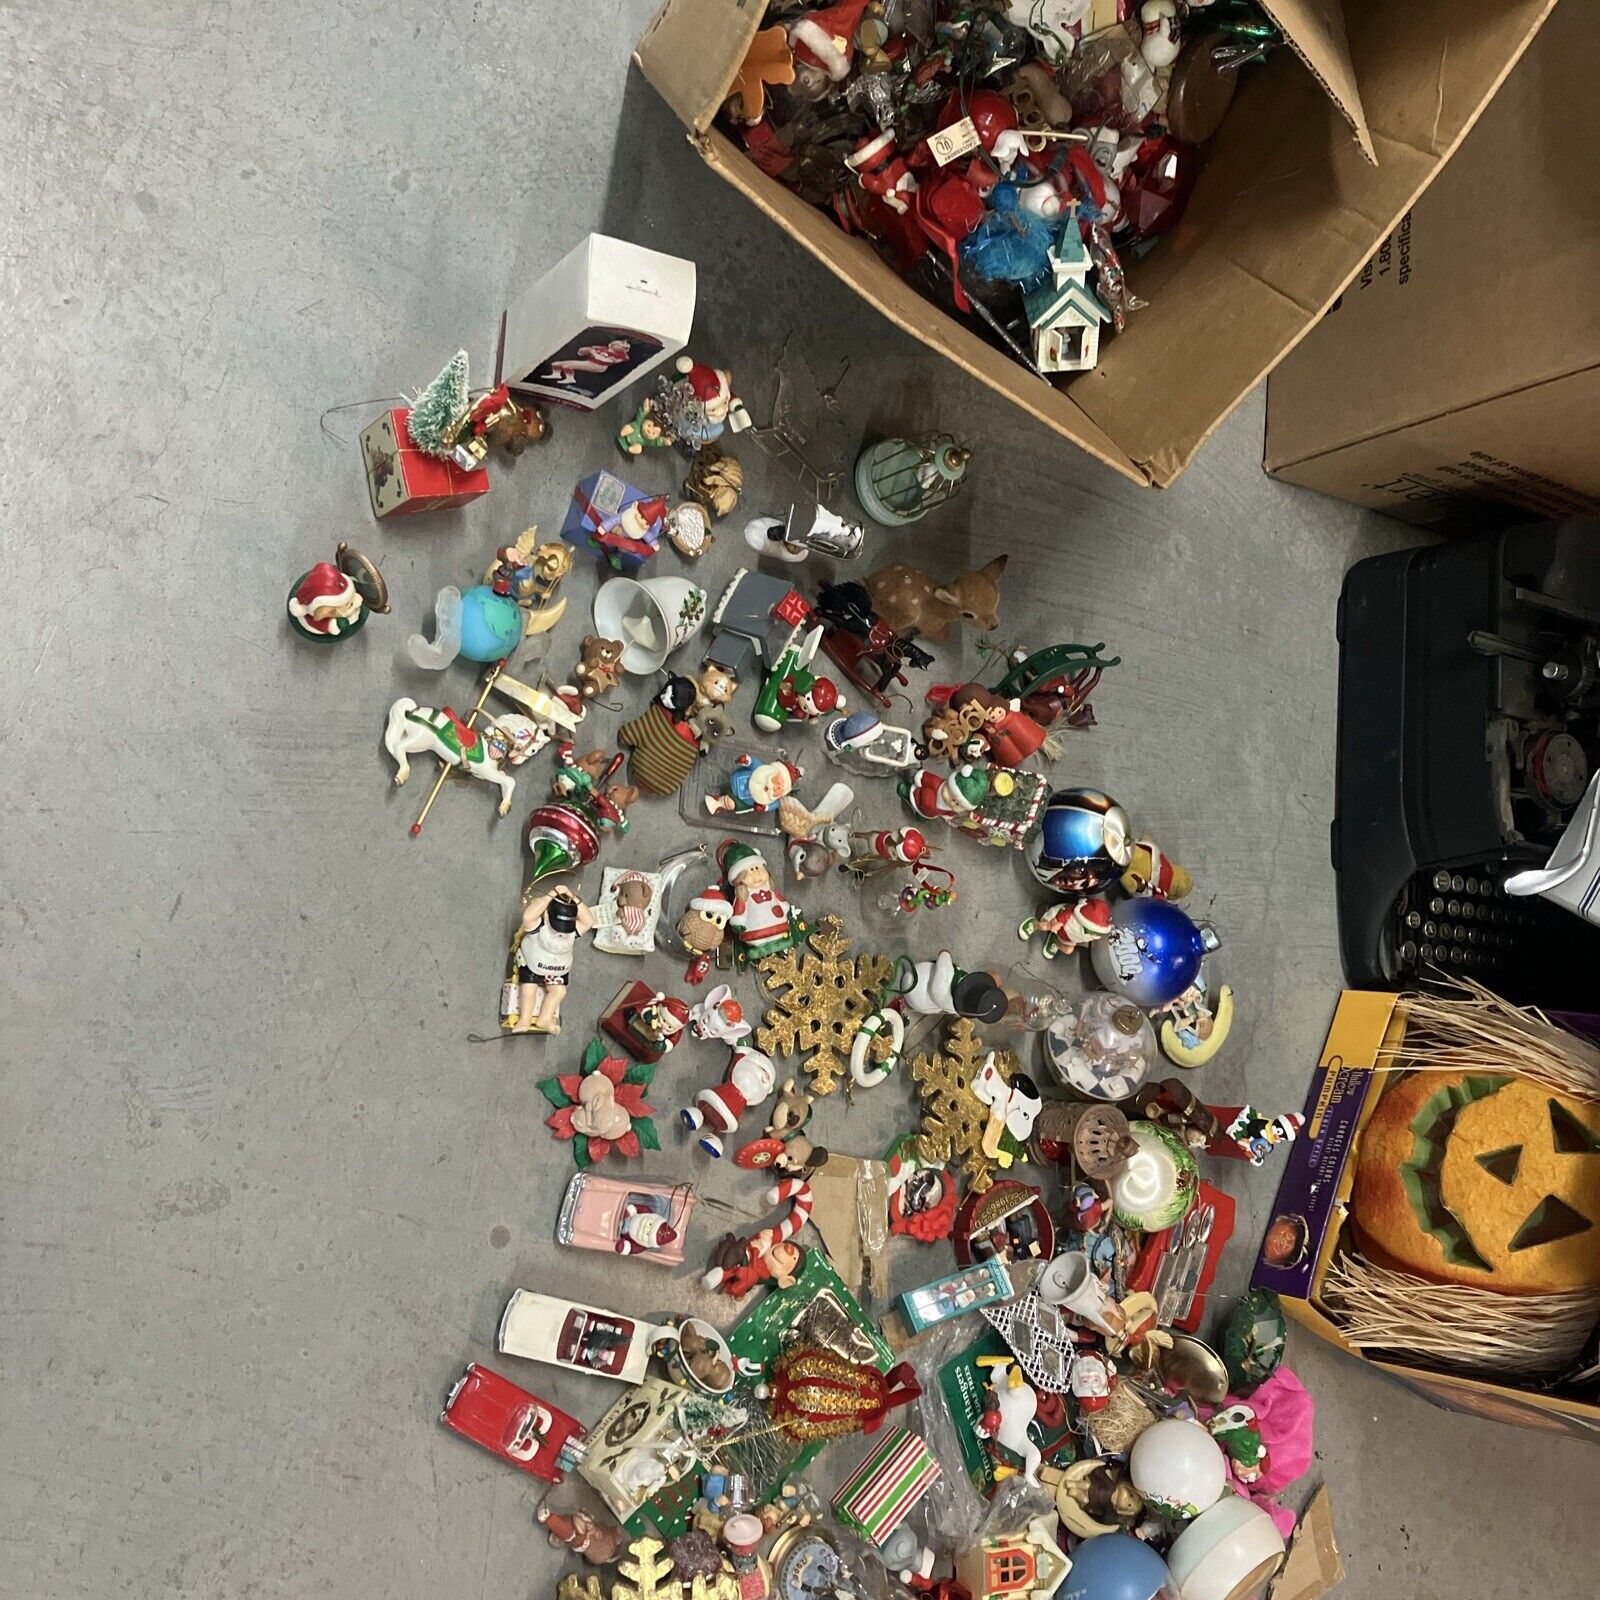 Huge Lot Of Random Vintage Christmas Ornaments Hundreds Of Pieces Some Very Rare